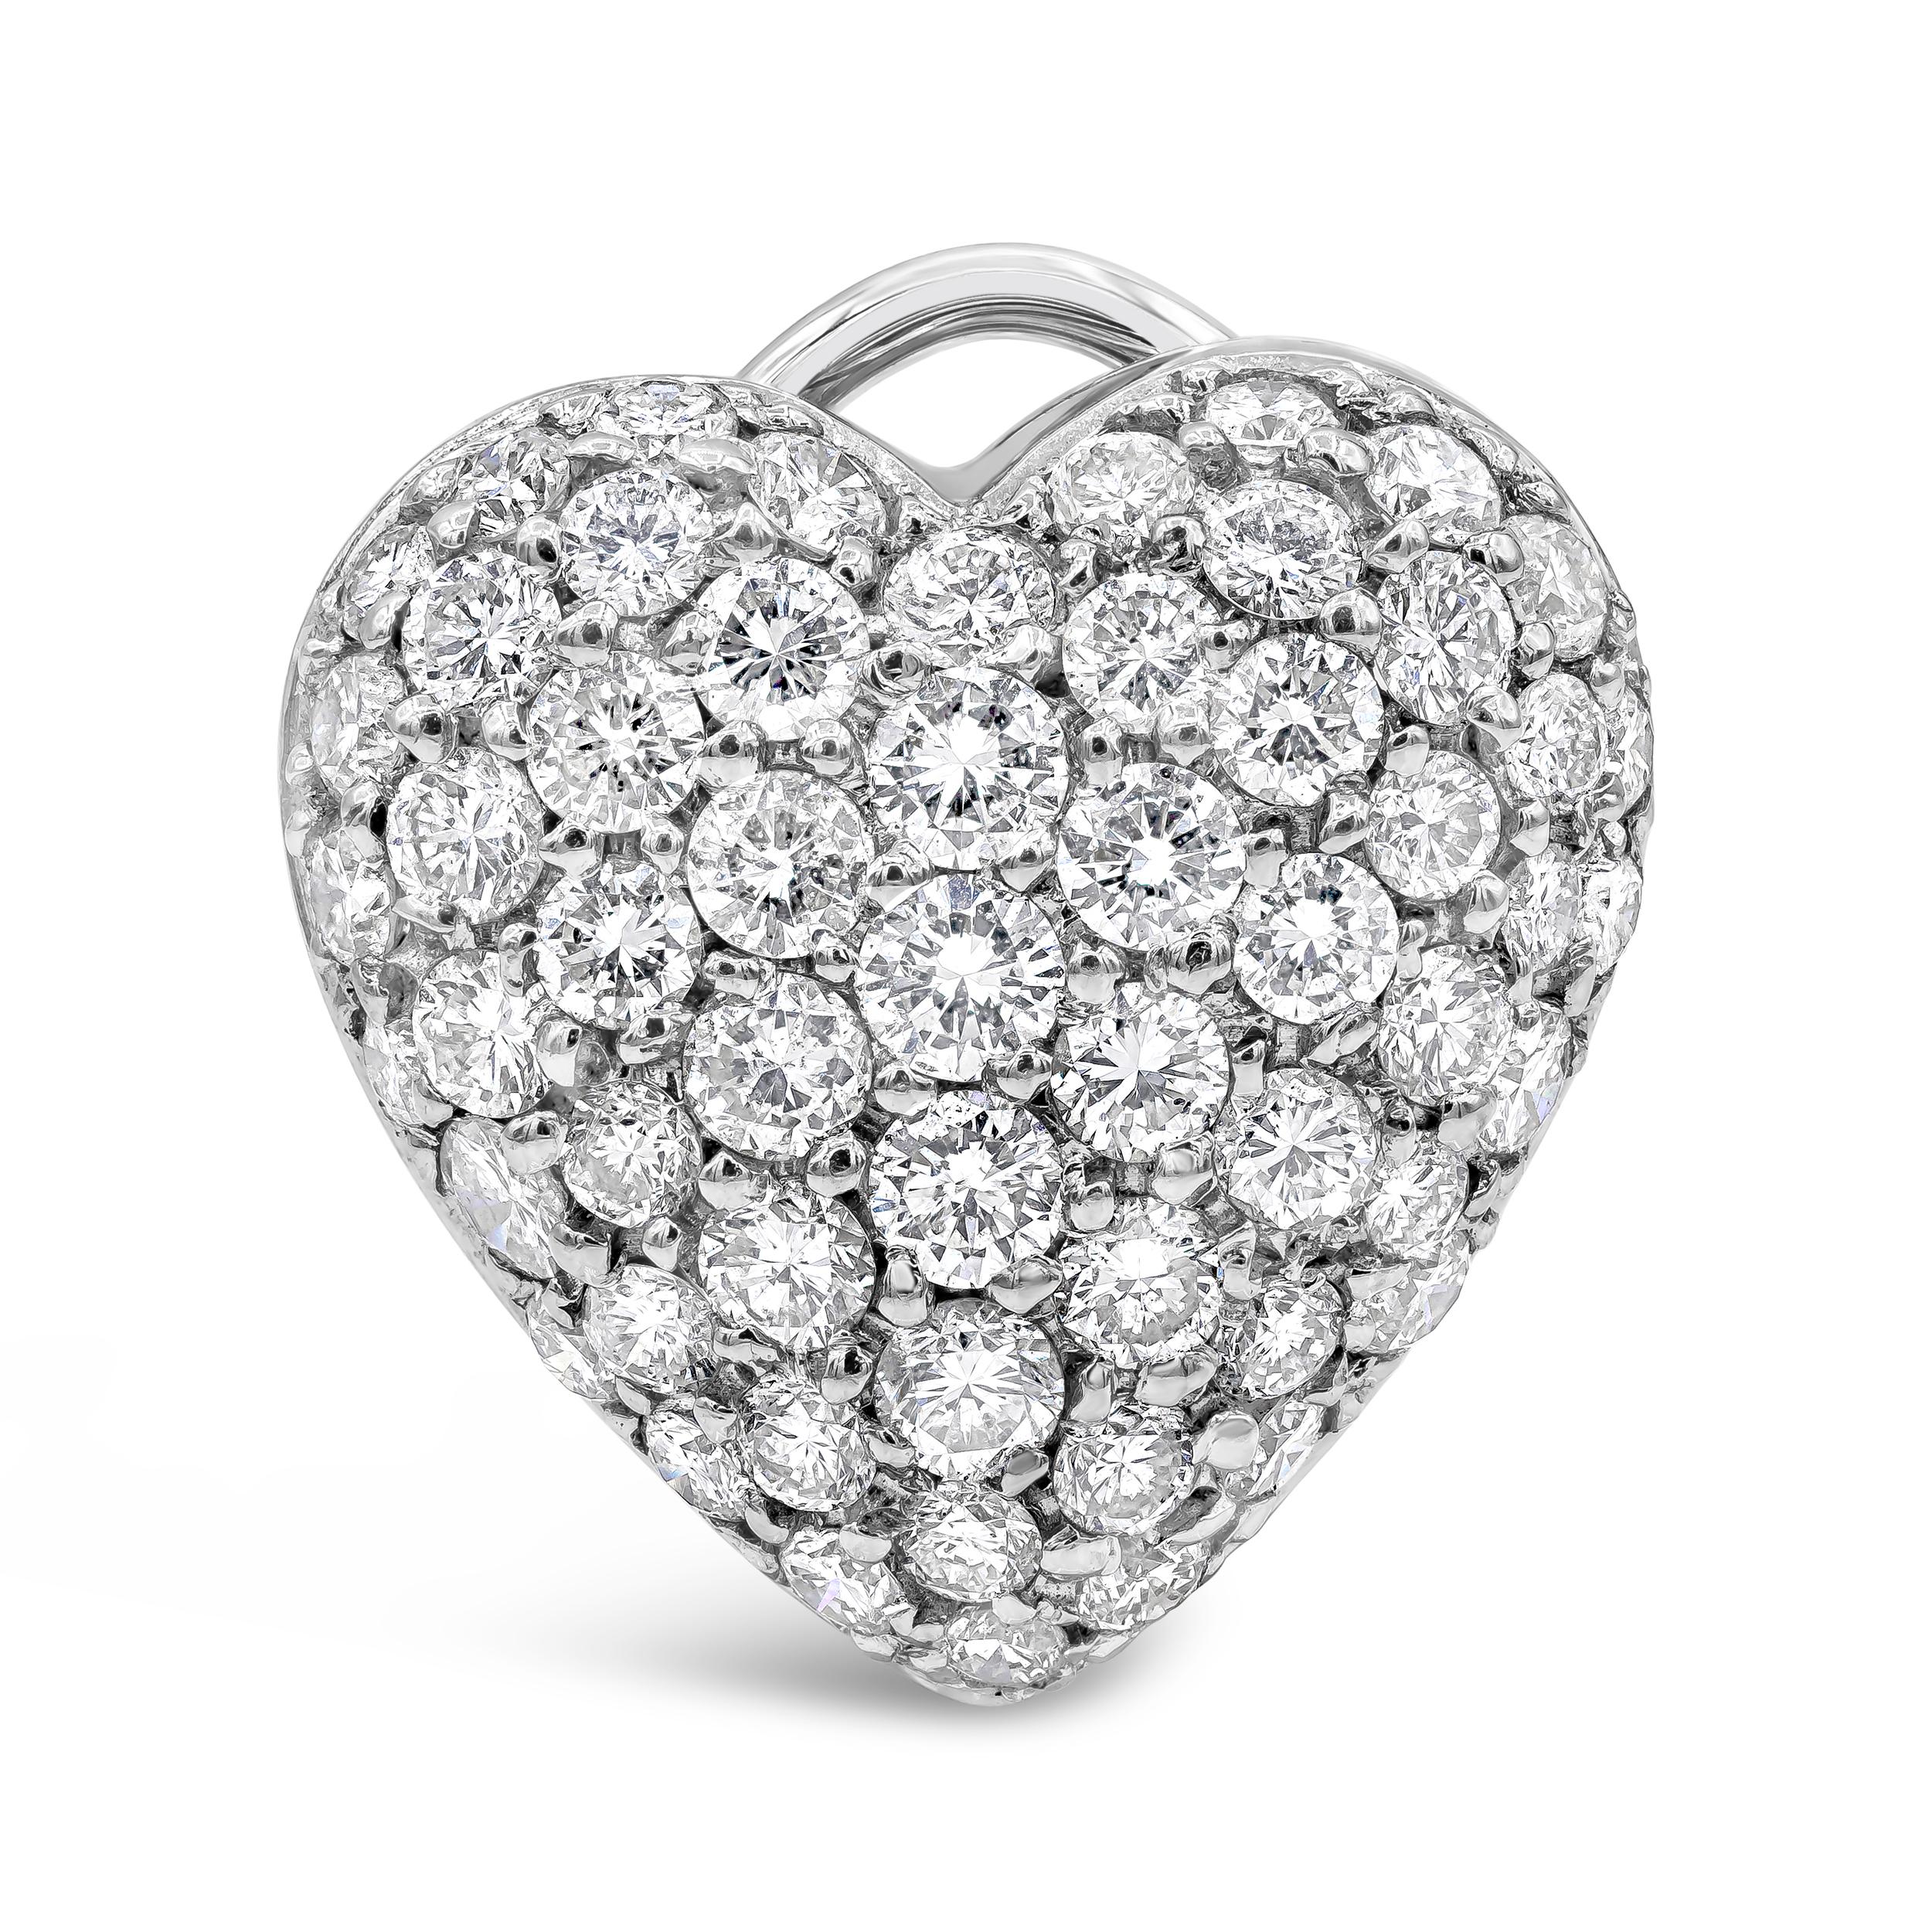 A lustrous and unique pair of earrings showcasing a 5.18 carats total of round brilliant diamonds, micro-pave set in an heart shape design. Made in 18k white gold. Omega Clip with post.

Roman Malakov is a custom house, specializing in creating